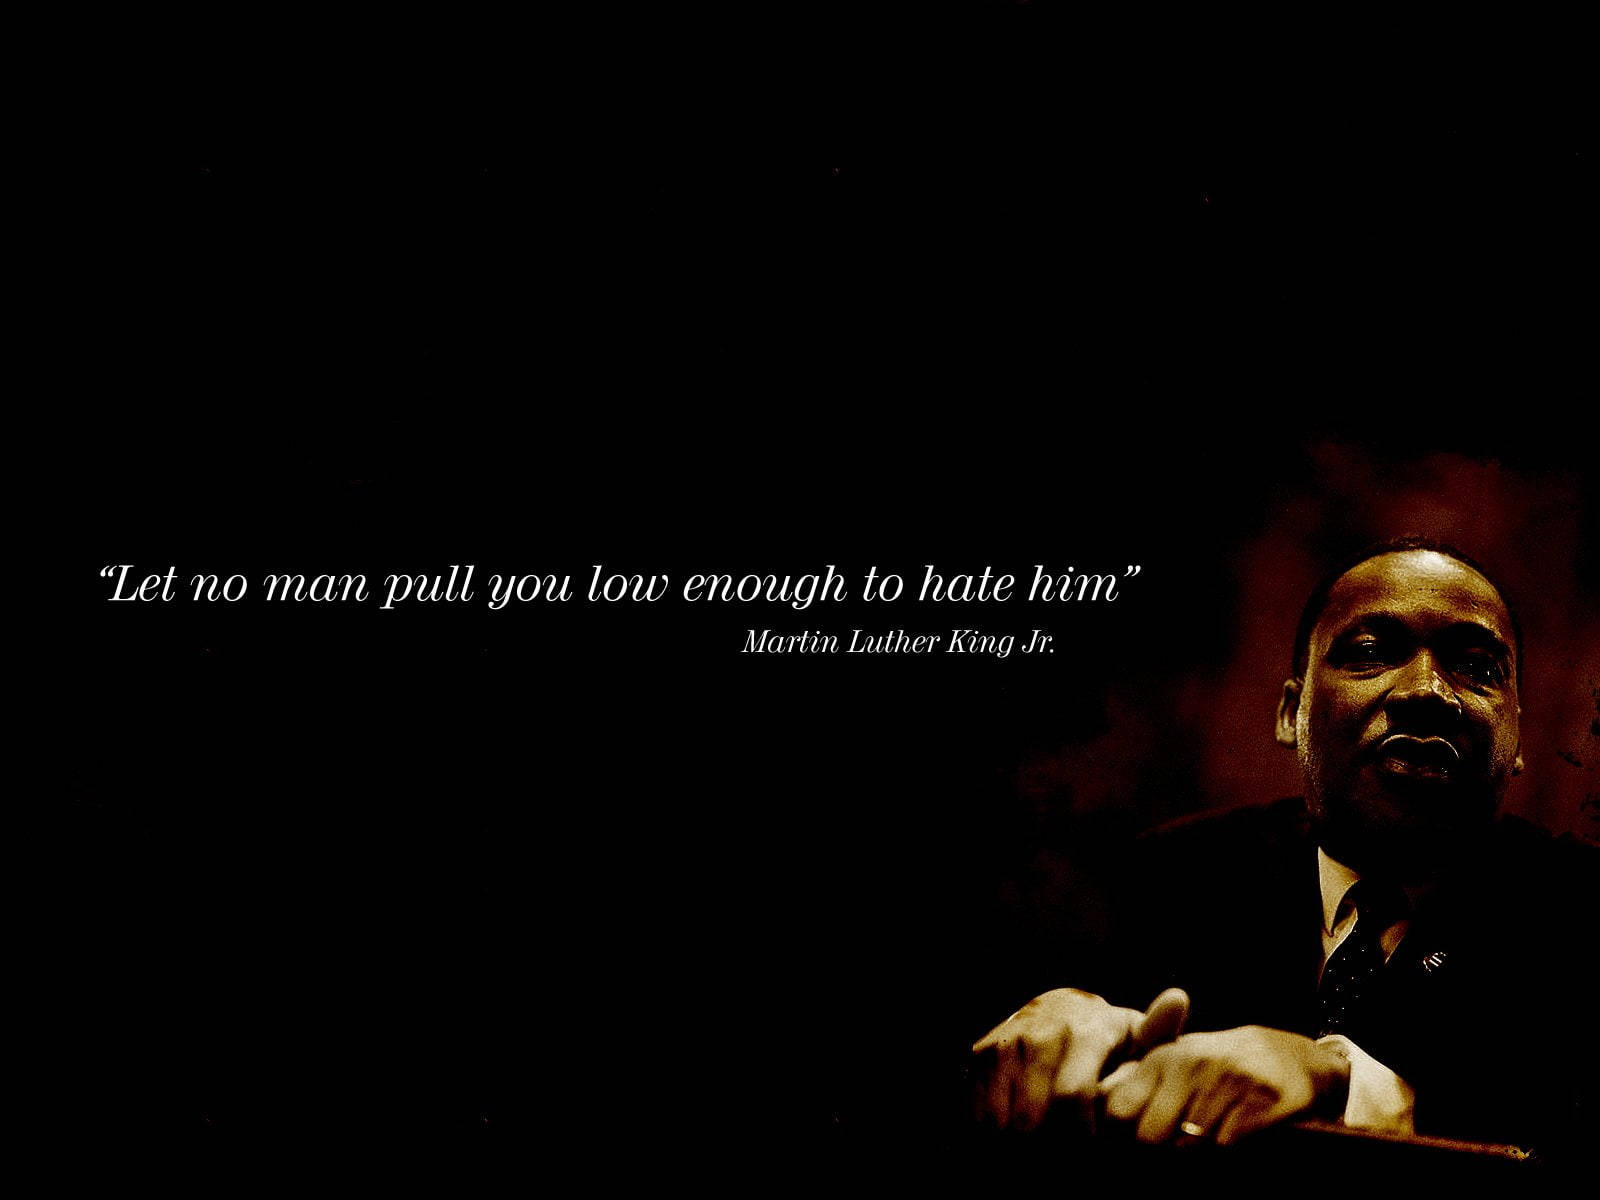 Caption: Martin Luther King Jr. Quoting Memorable Words Of Wisdom Background